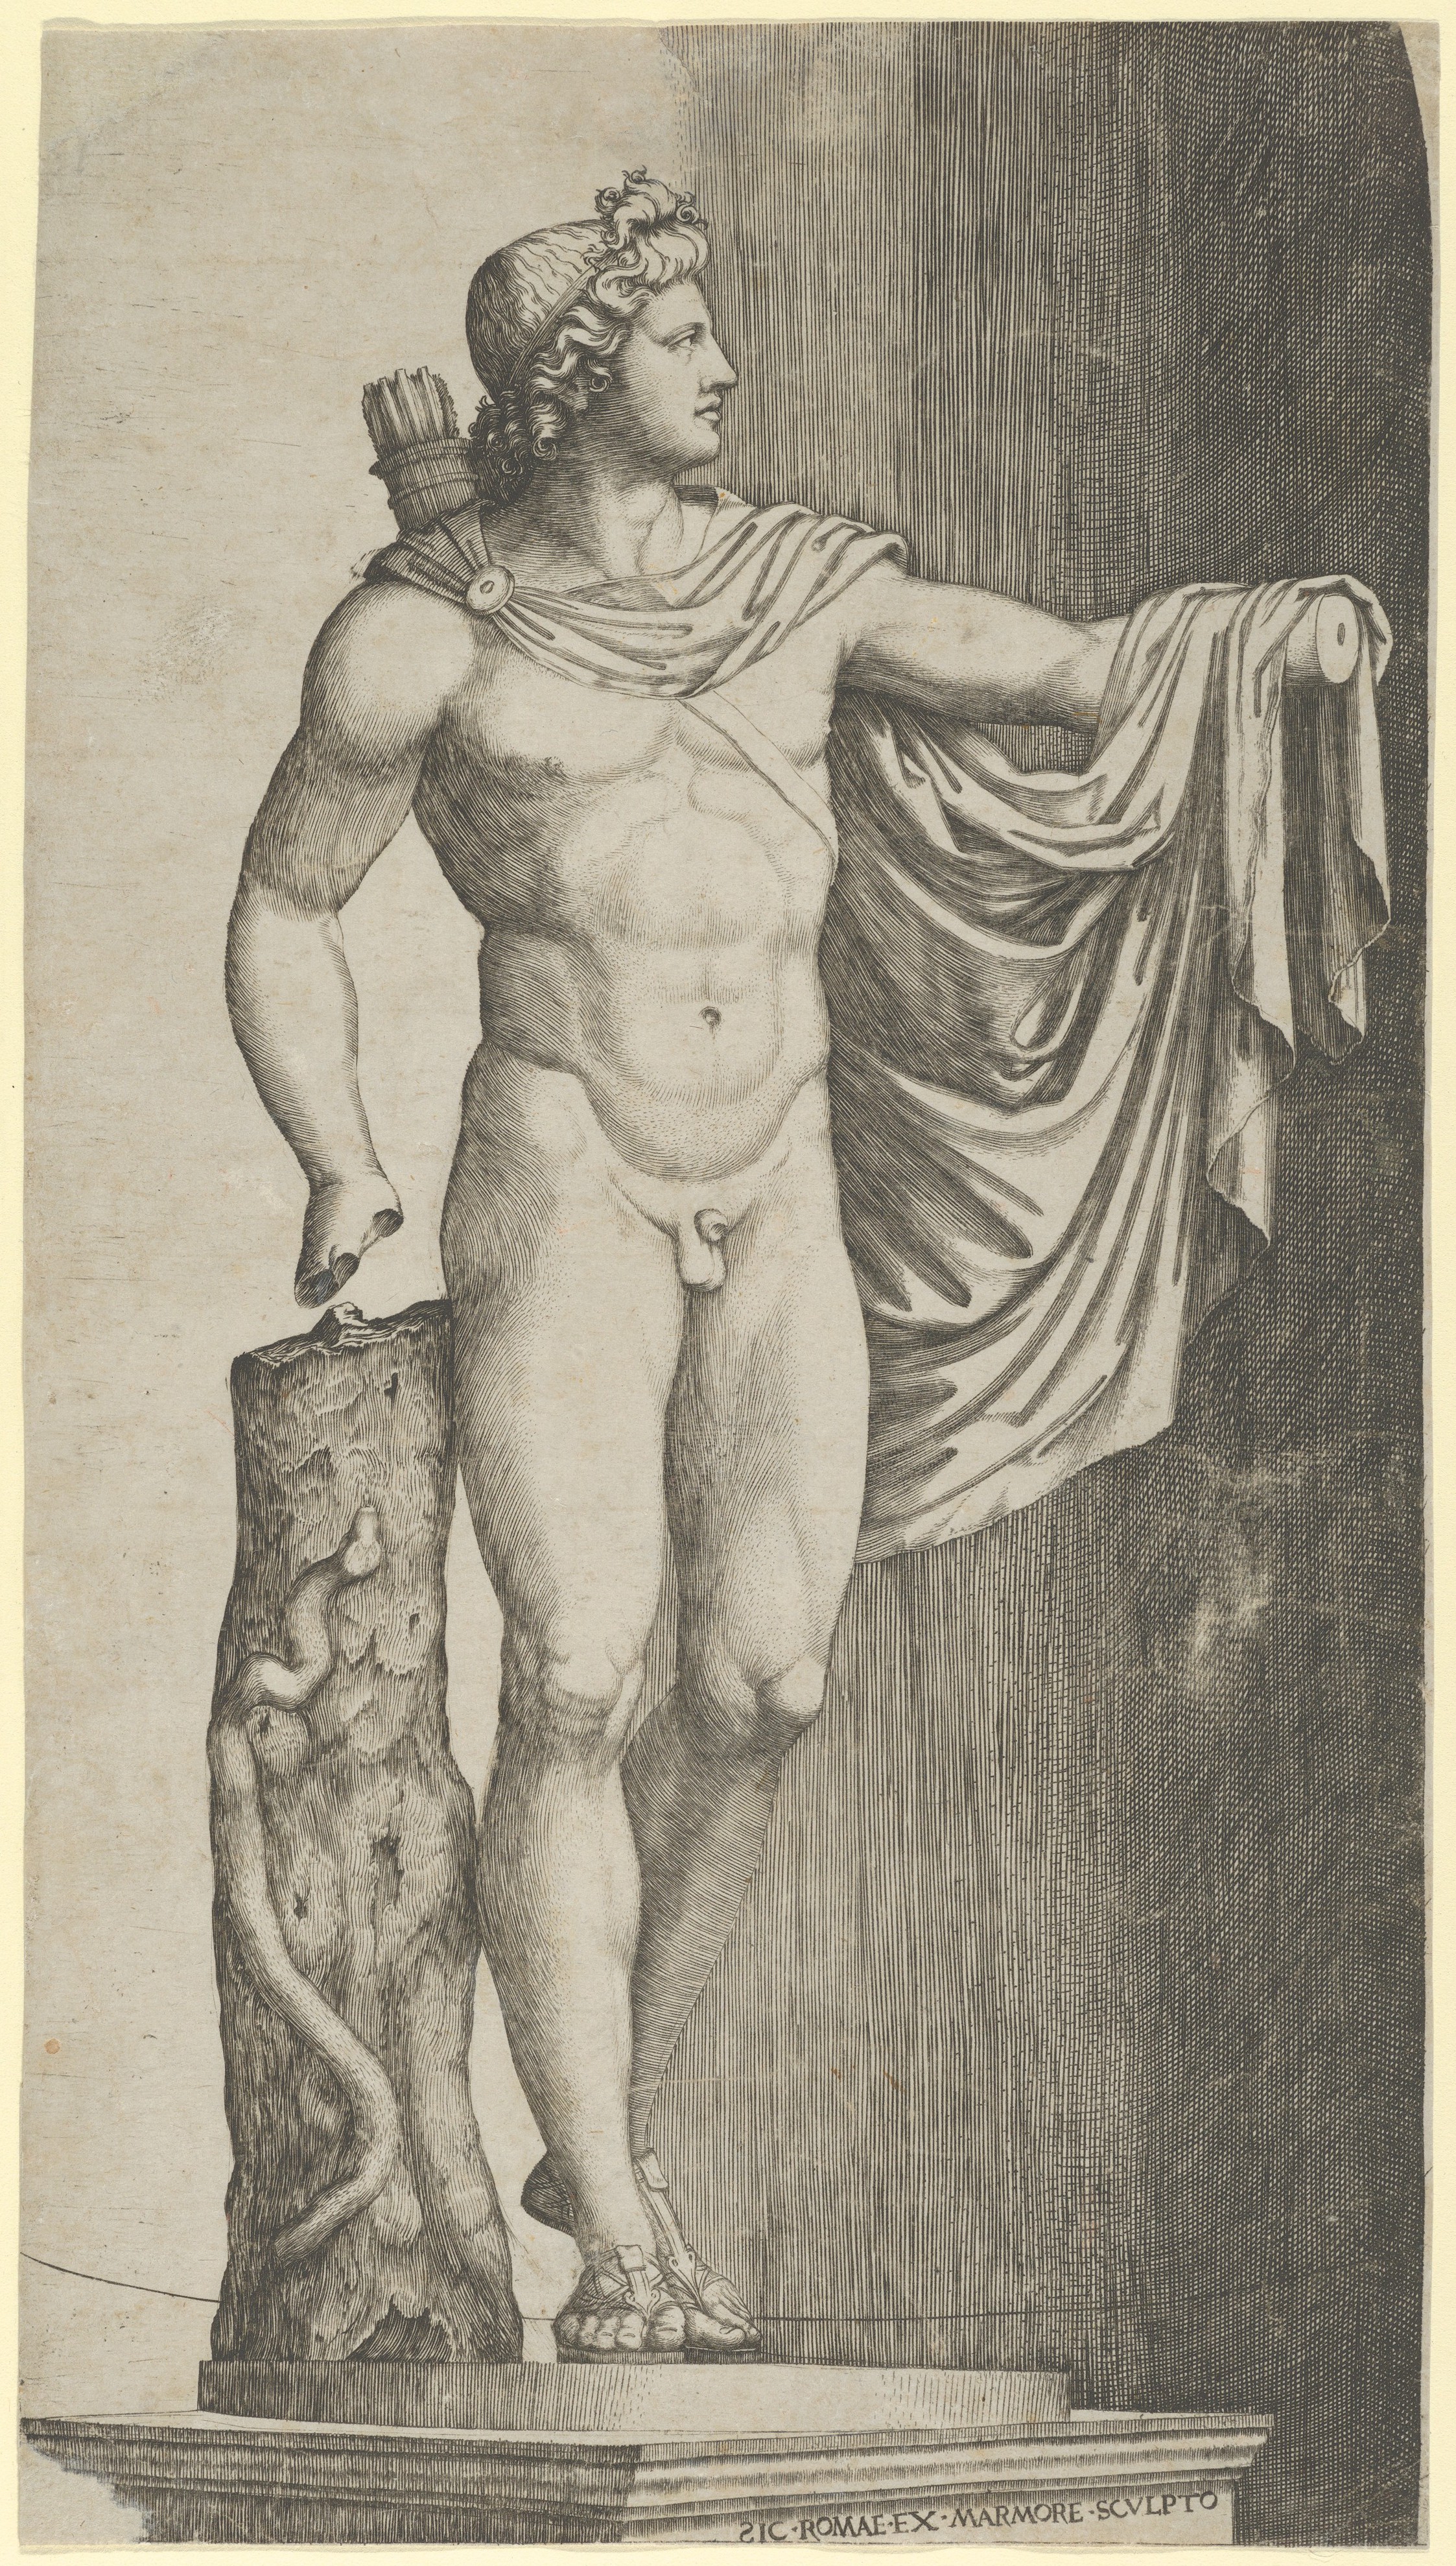 Early C16th engraving by Marcantonio Raimondi of the Vatican-owned circa C2nd marble copy of the bronze statue of Apollo attributed to the elusive Leochares, circa 330 BCE. So named the Apollo Belvedere as it lives in the Vatican's Cortile del Belvedere.